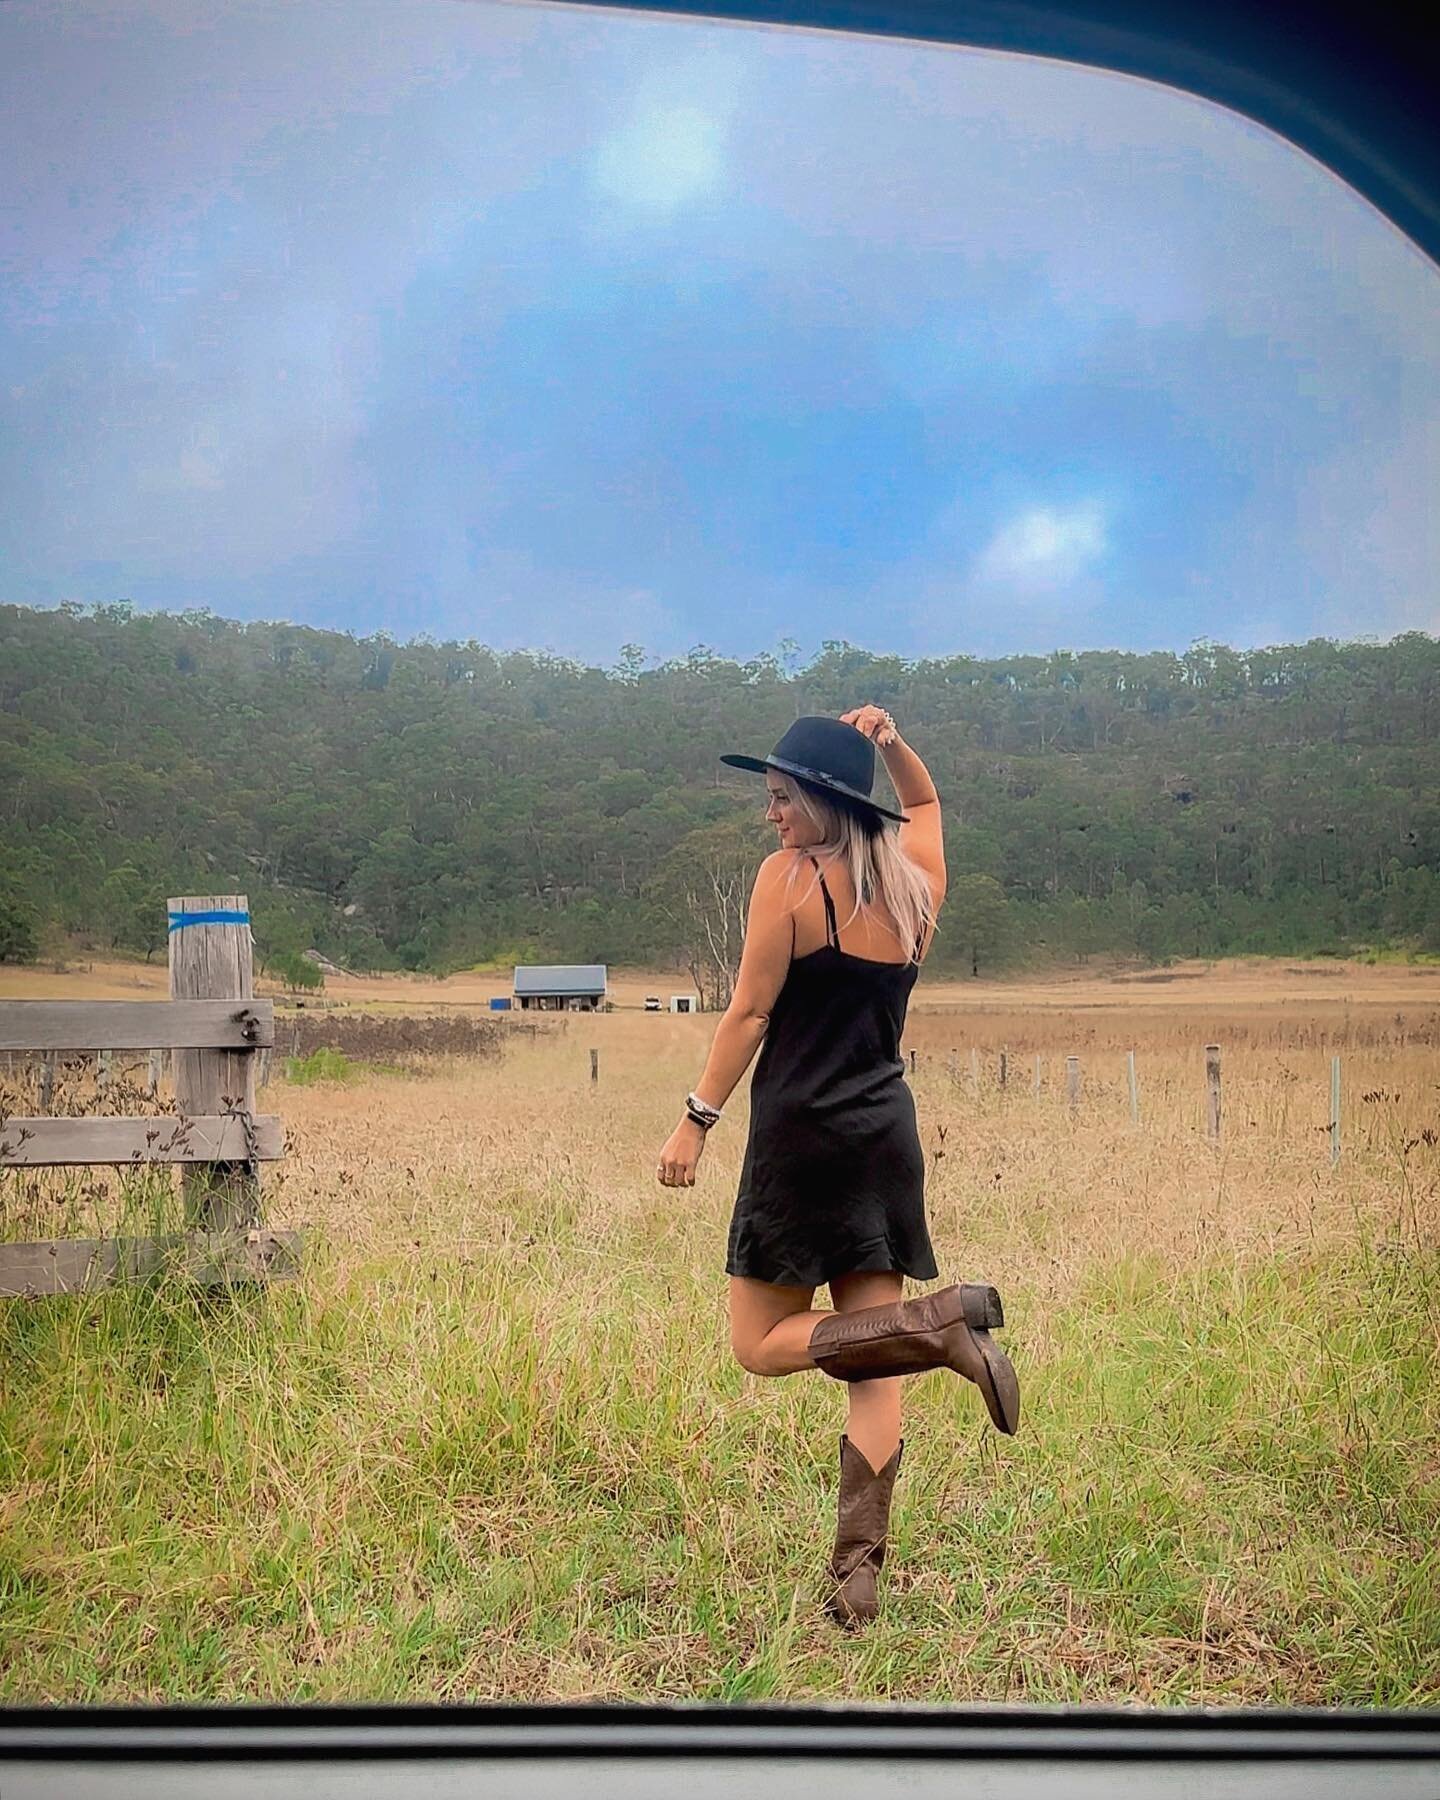 a spiritually secure, purpose driven, heart-led, well travelled, in the moment, slow meaningful life 🤎 
.
.
.
.
. 
.
.
.
.
.
.
.
.
#cowboy #countrygirl #camping #blog  #takemecamping #cowboyboots #bootscootin #markets #fleamarket #nsw #sundaymarket 